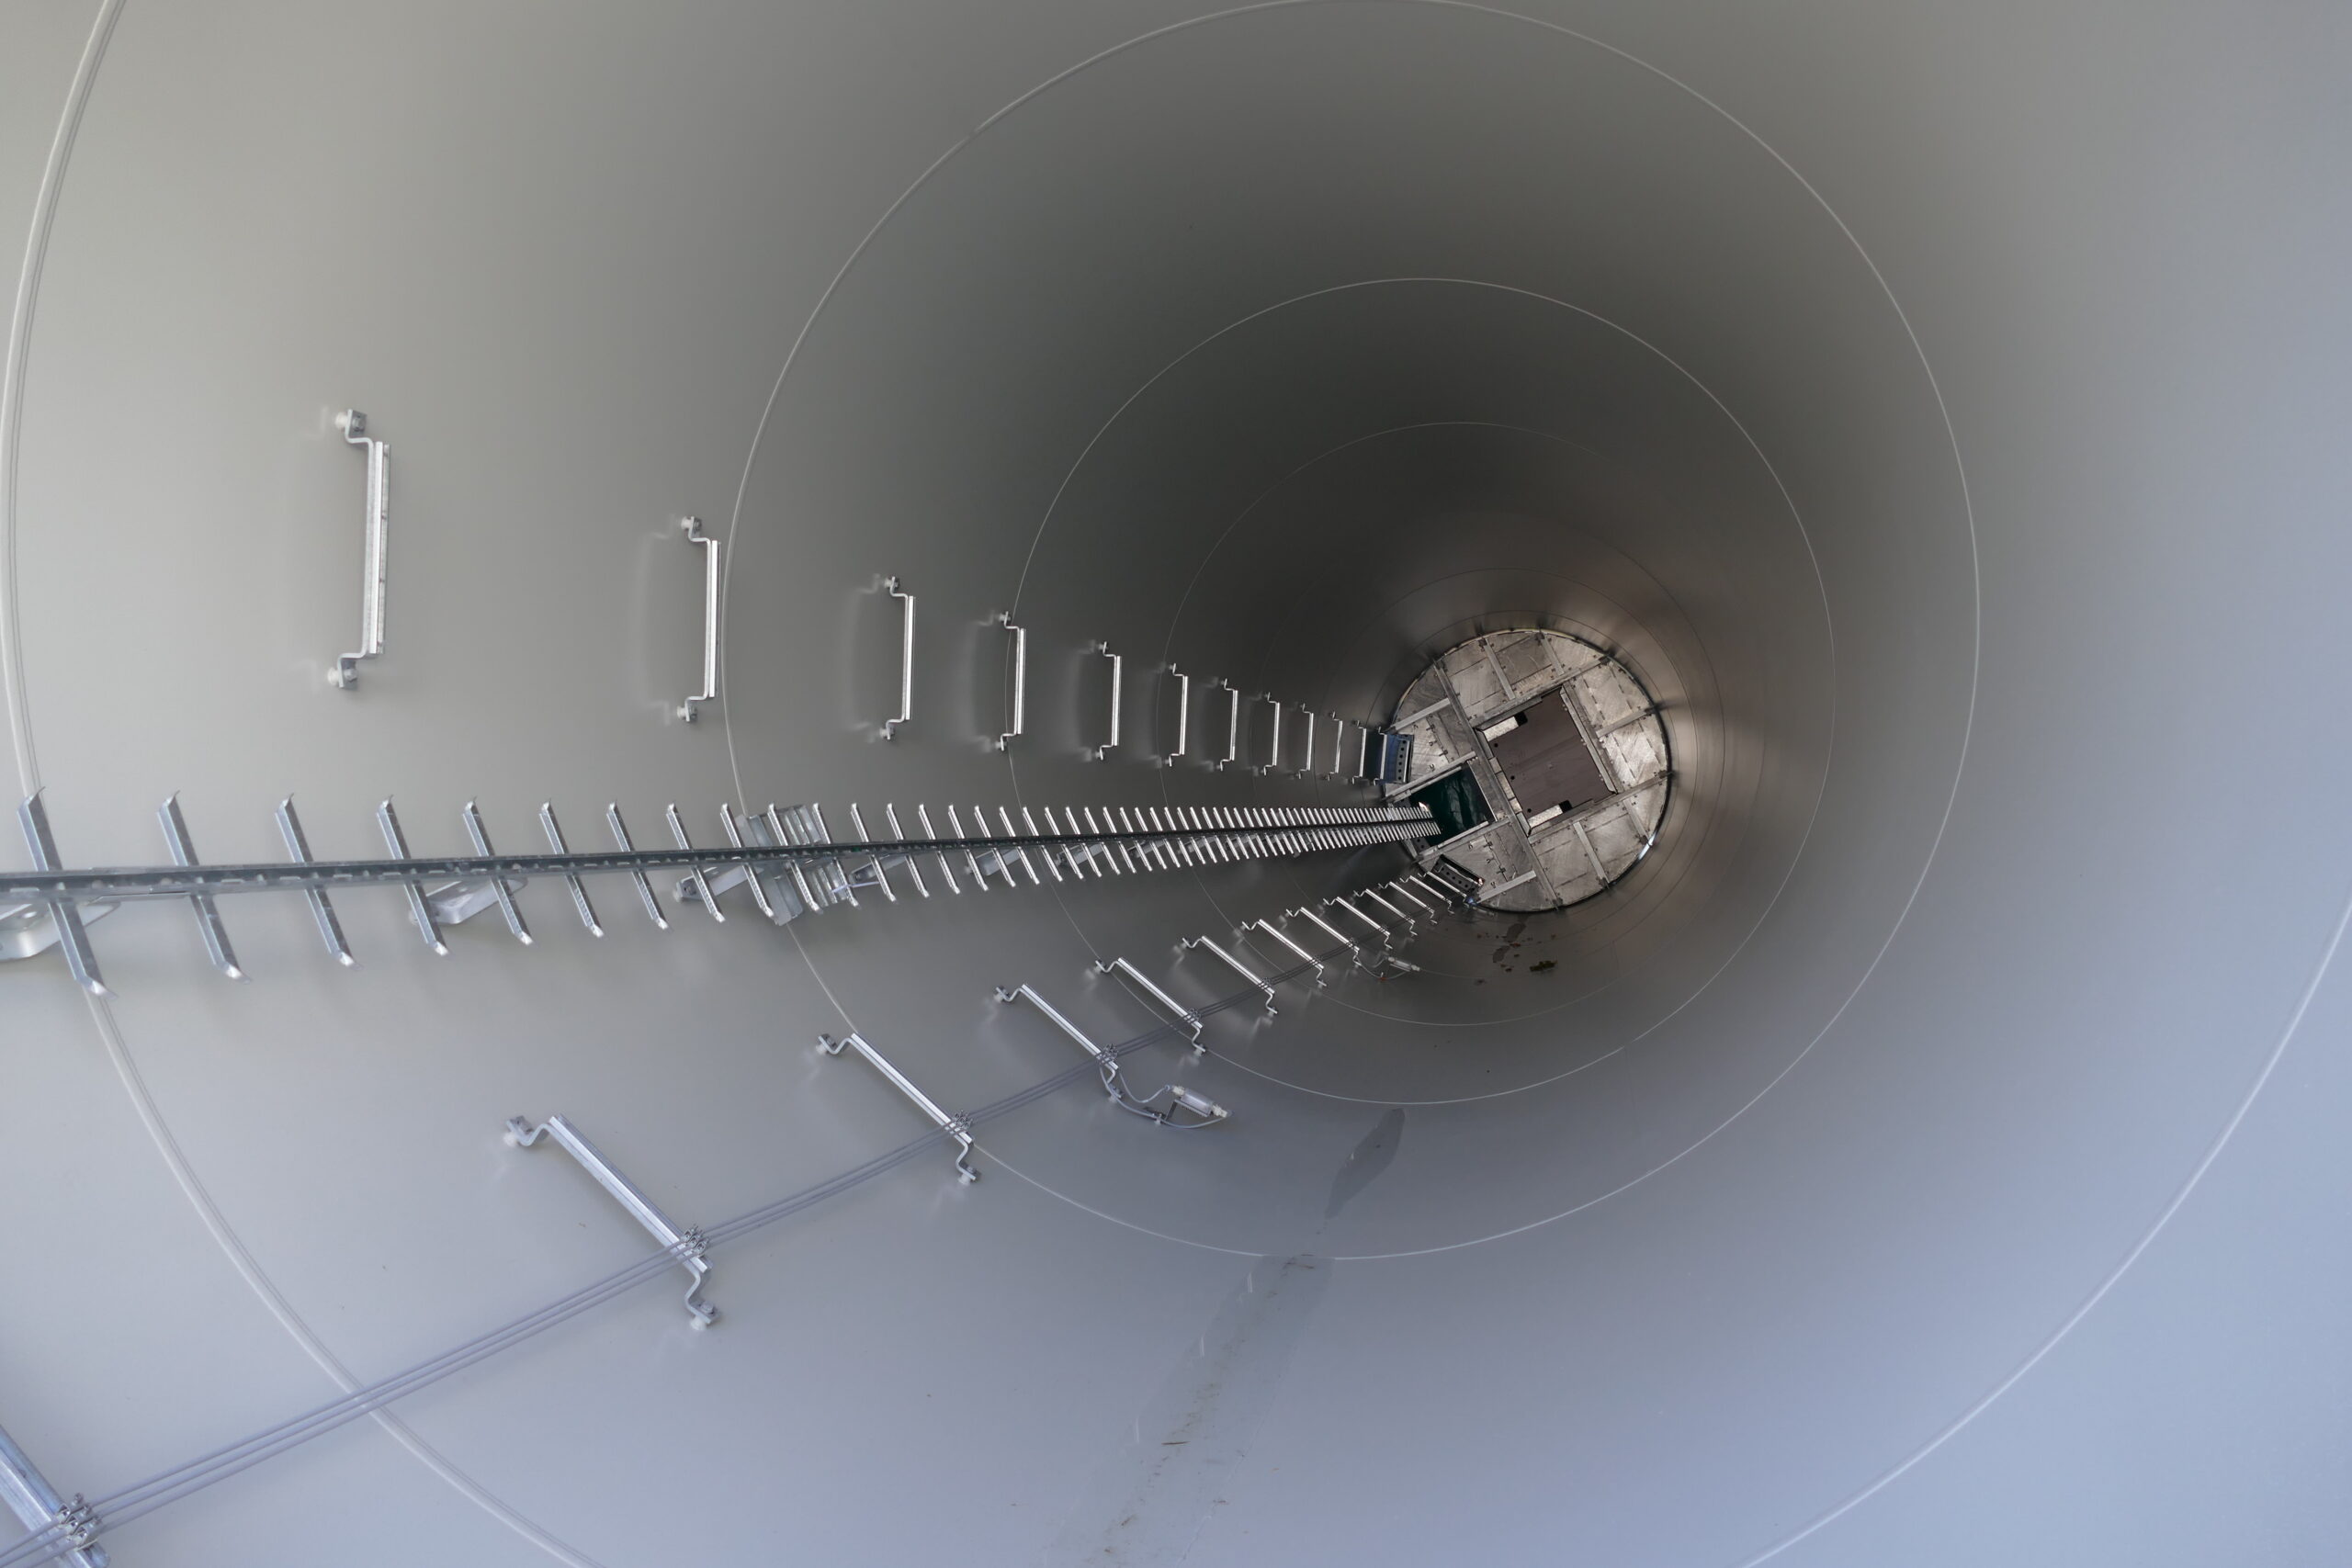 The inside of an under-construction wind turbine’s hollow vertical column, showing the built-in ladder rungs that allow access to the nacelle (top part) for maintenance and repair purposes